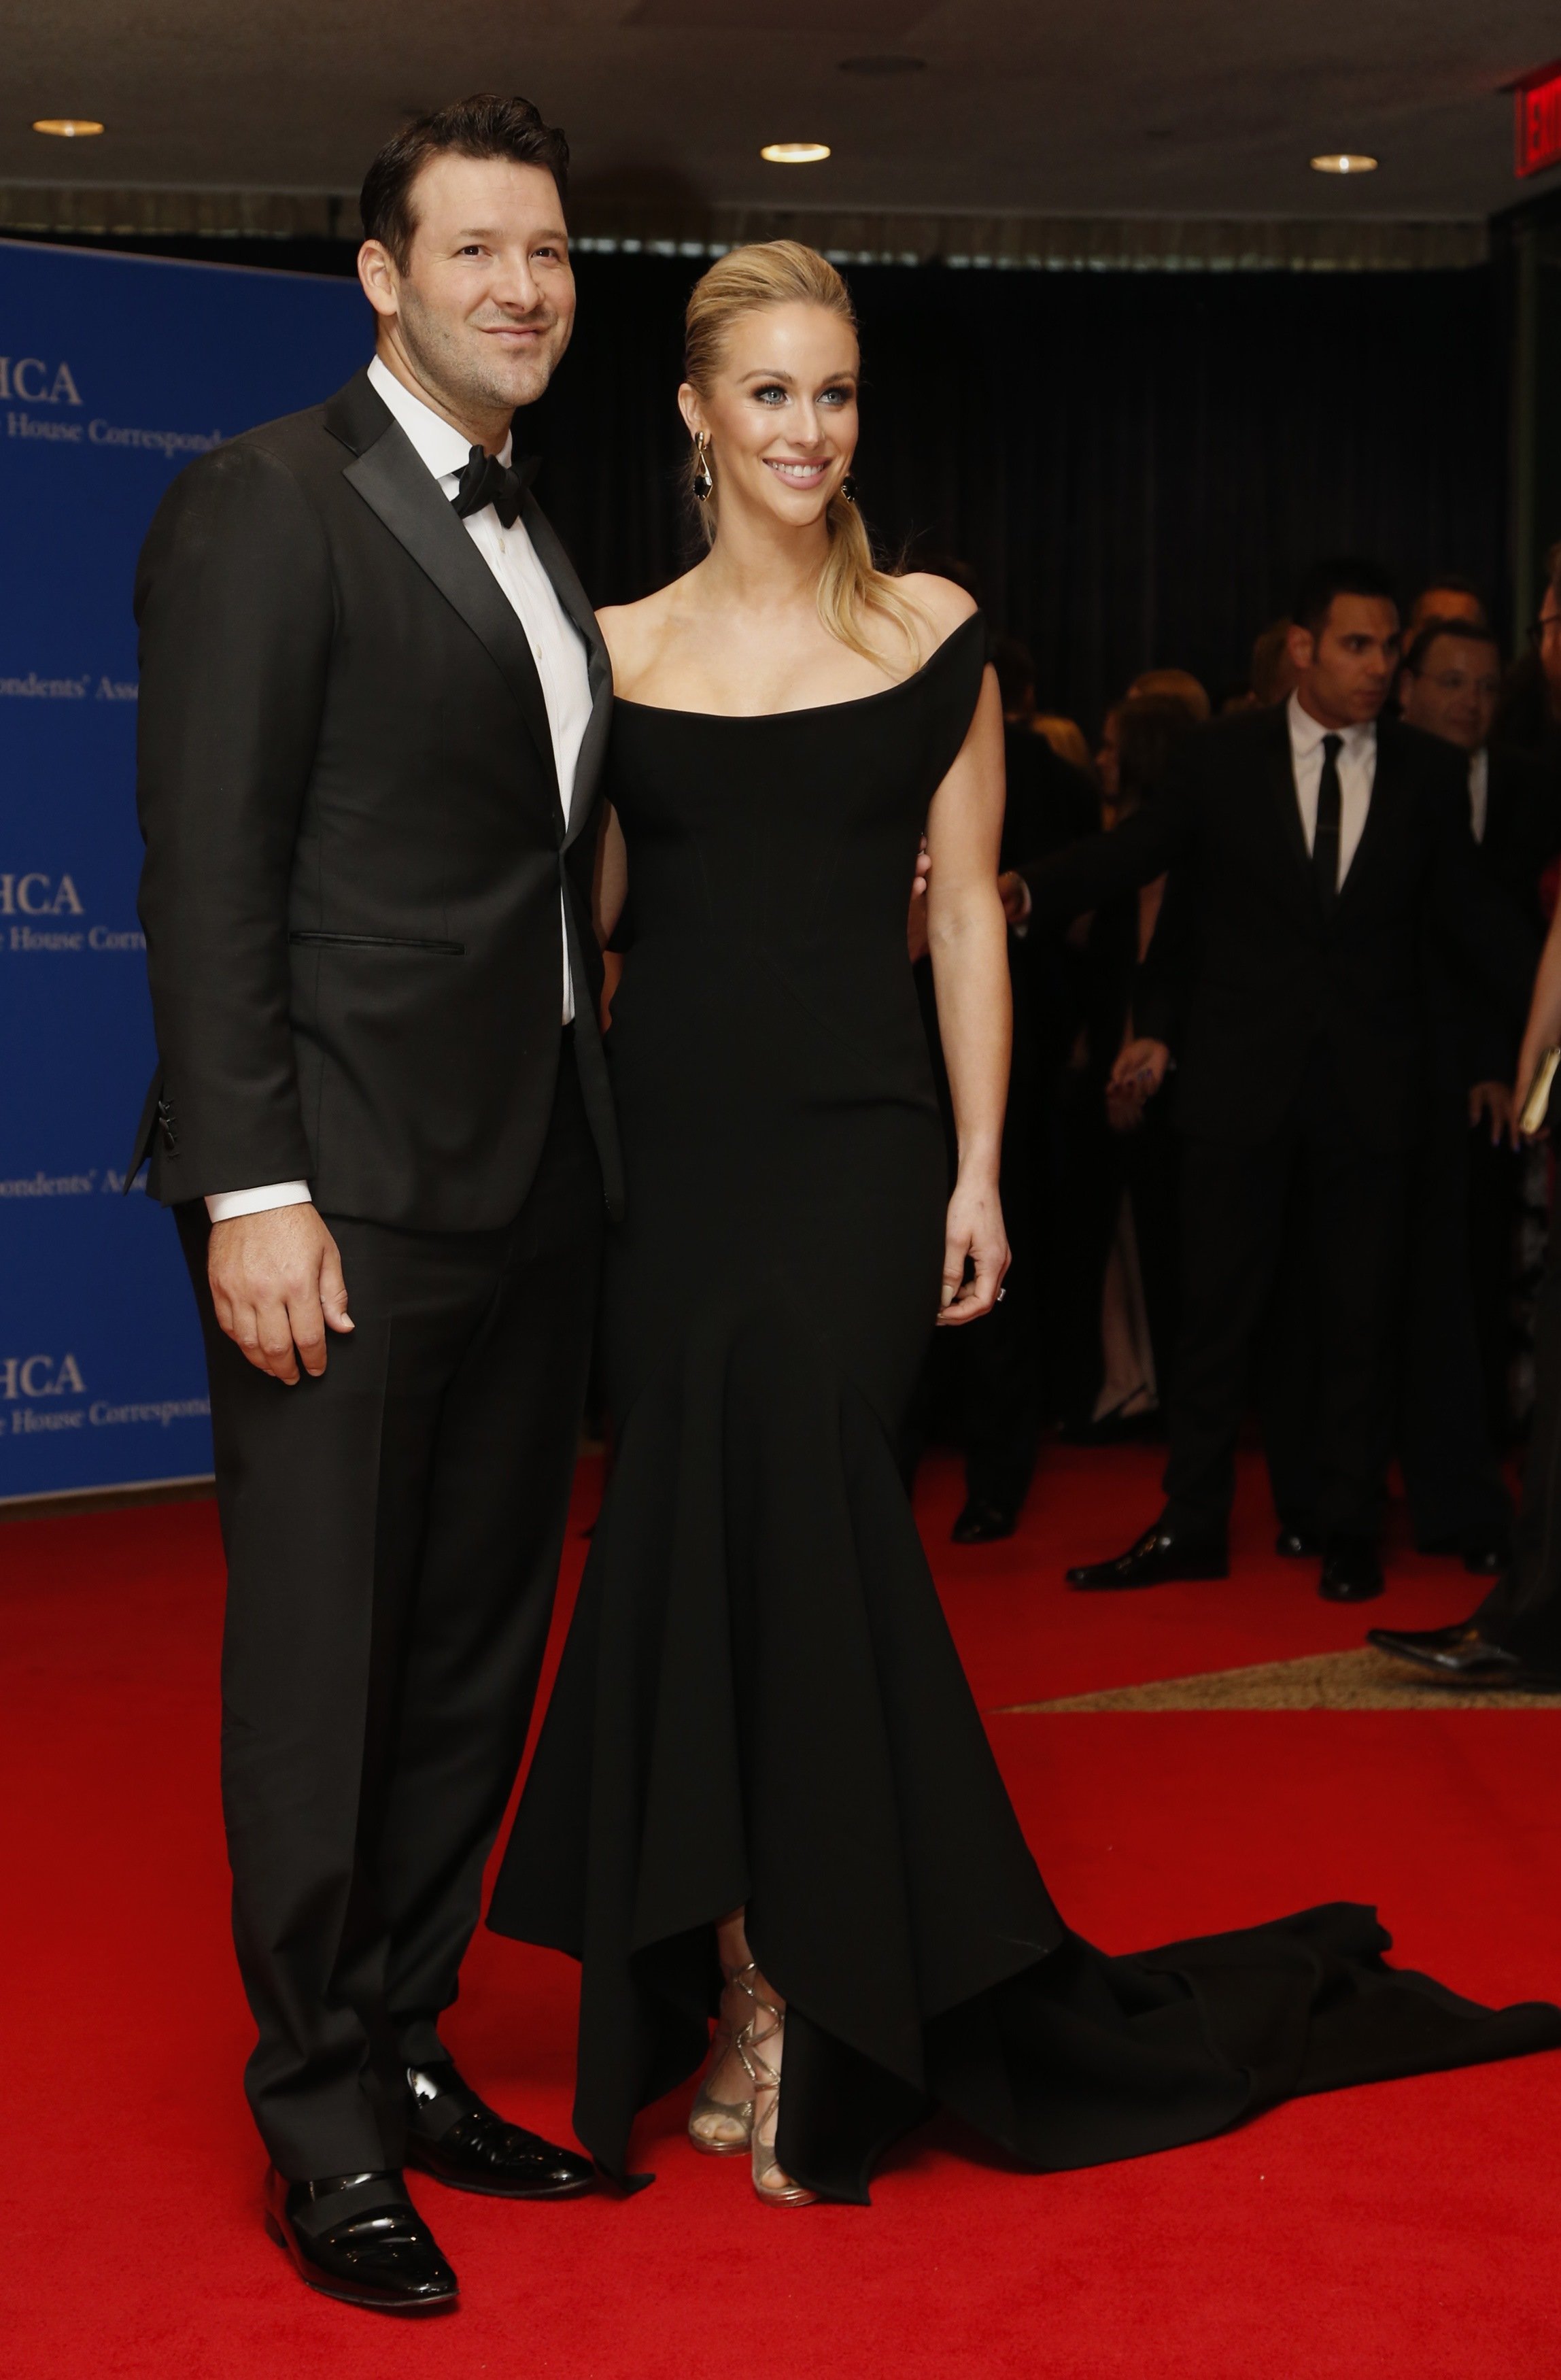 NFL football player Tony Romo and wife Candice Crawford attend the White House Correspondents' Association Dinner at the Washington Hilton Hotel in Washington on April 30, 2016.